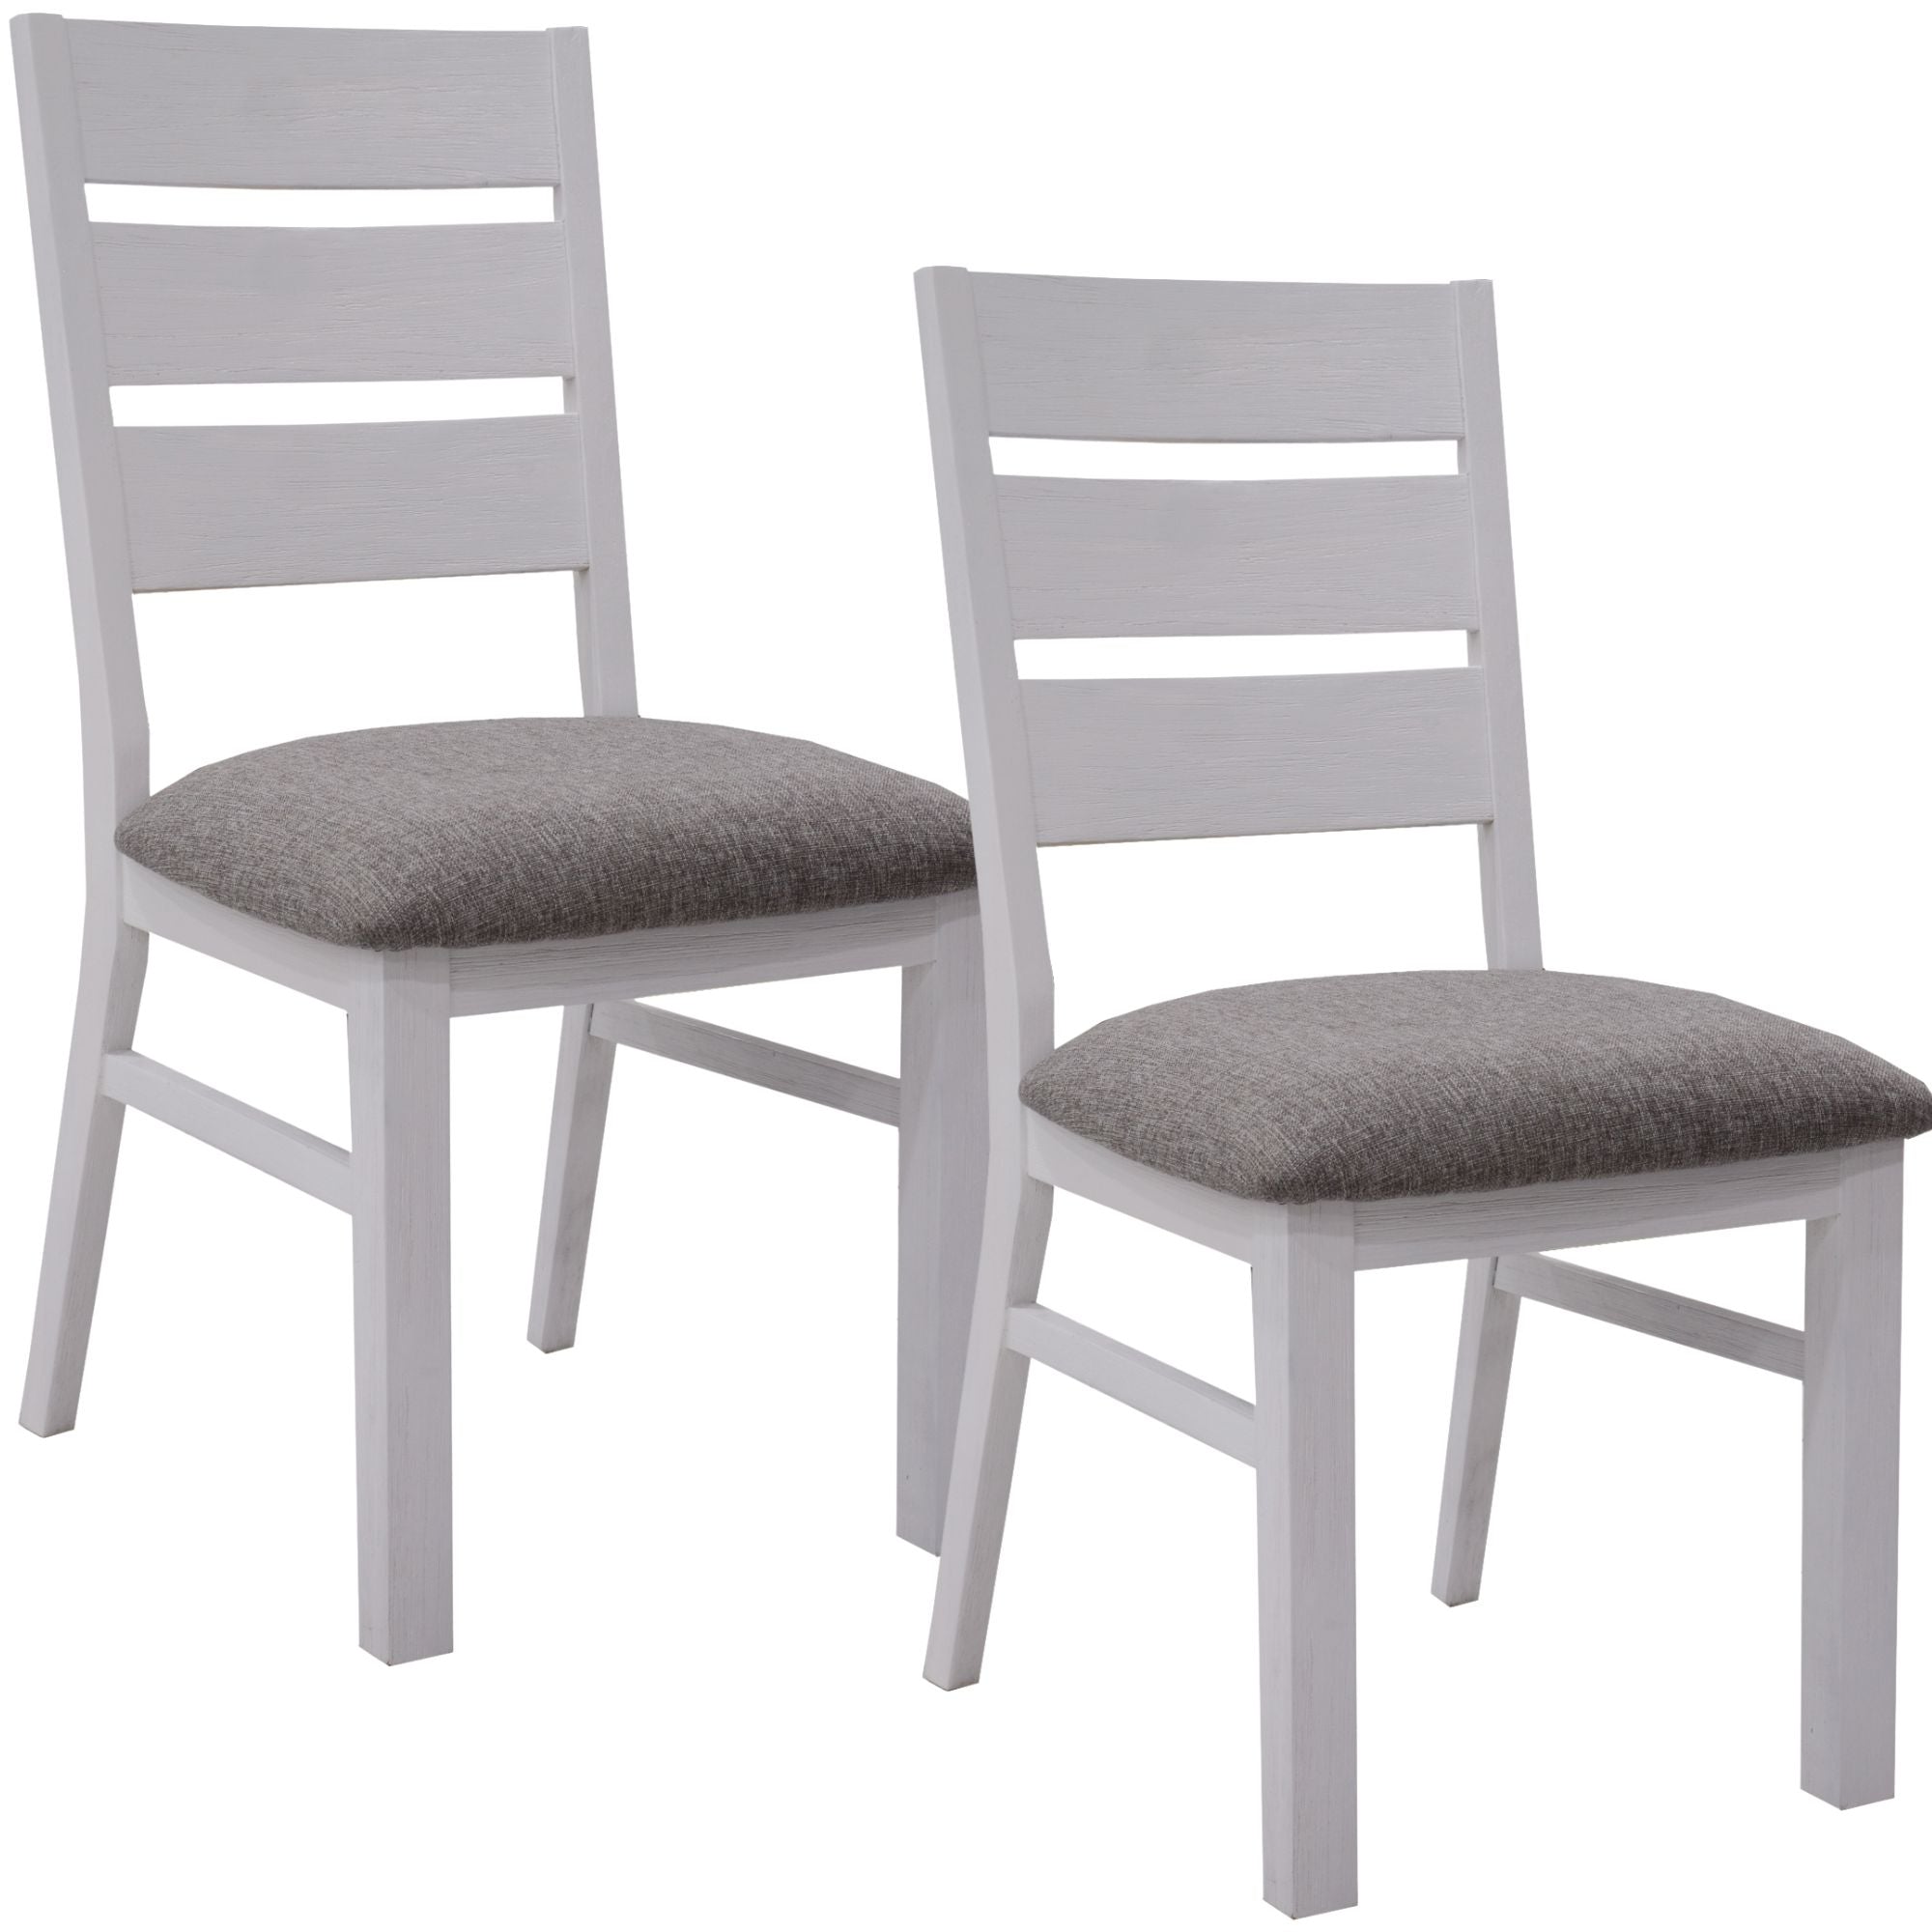 Plumeria Dining Chair Set of 2 Solid Acacia Wood Dining Furniture - White Brush Deals499